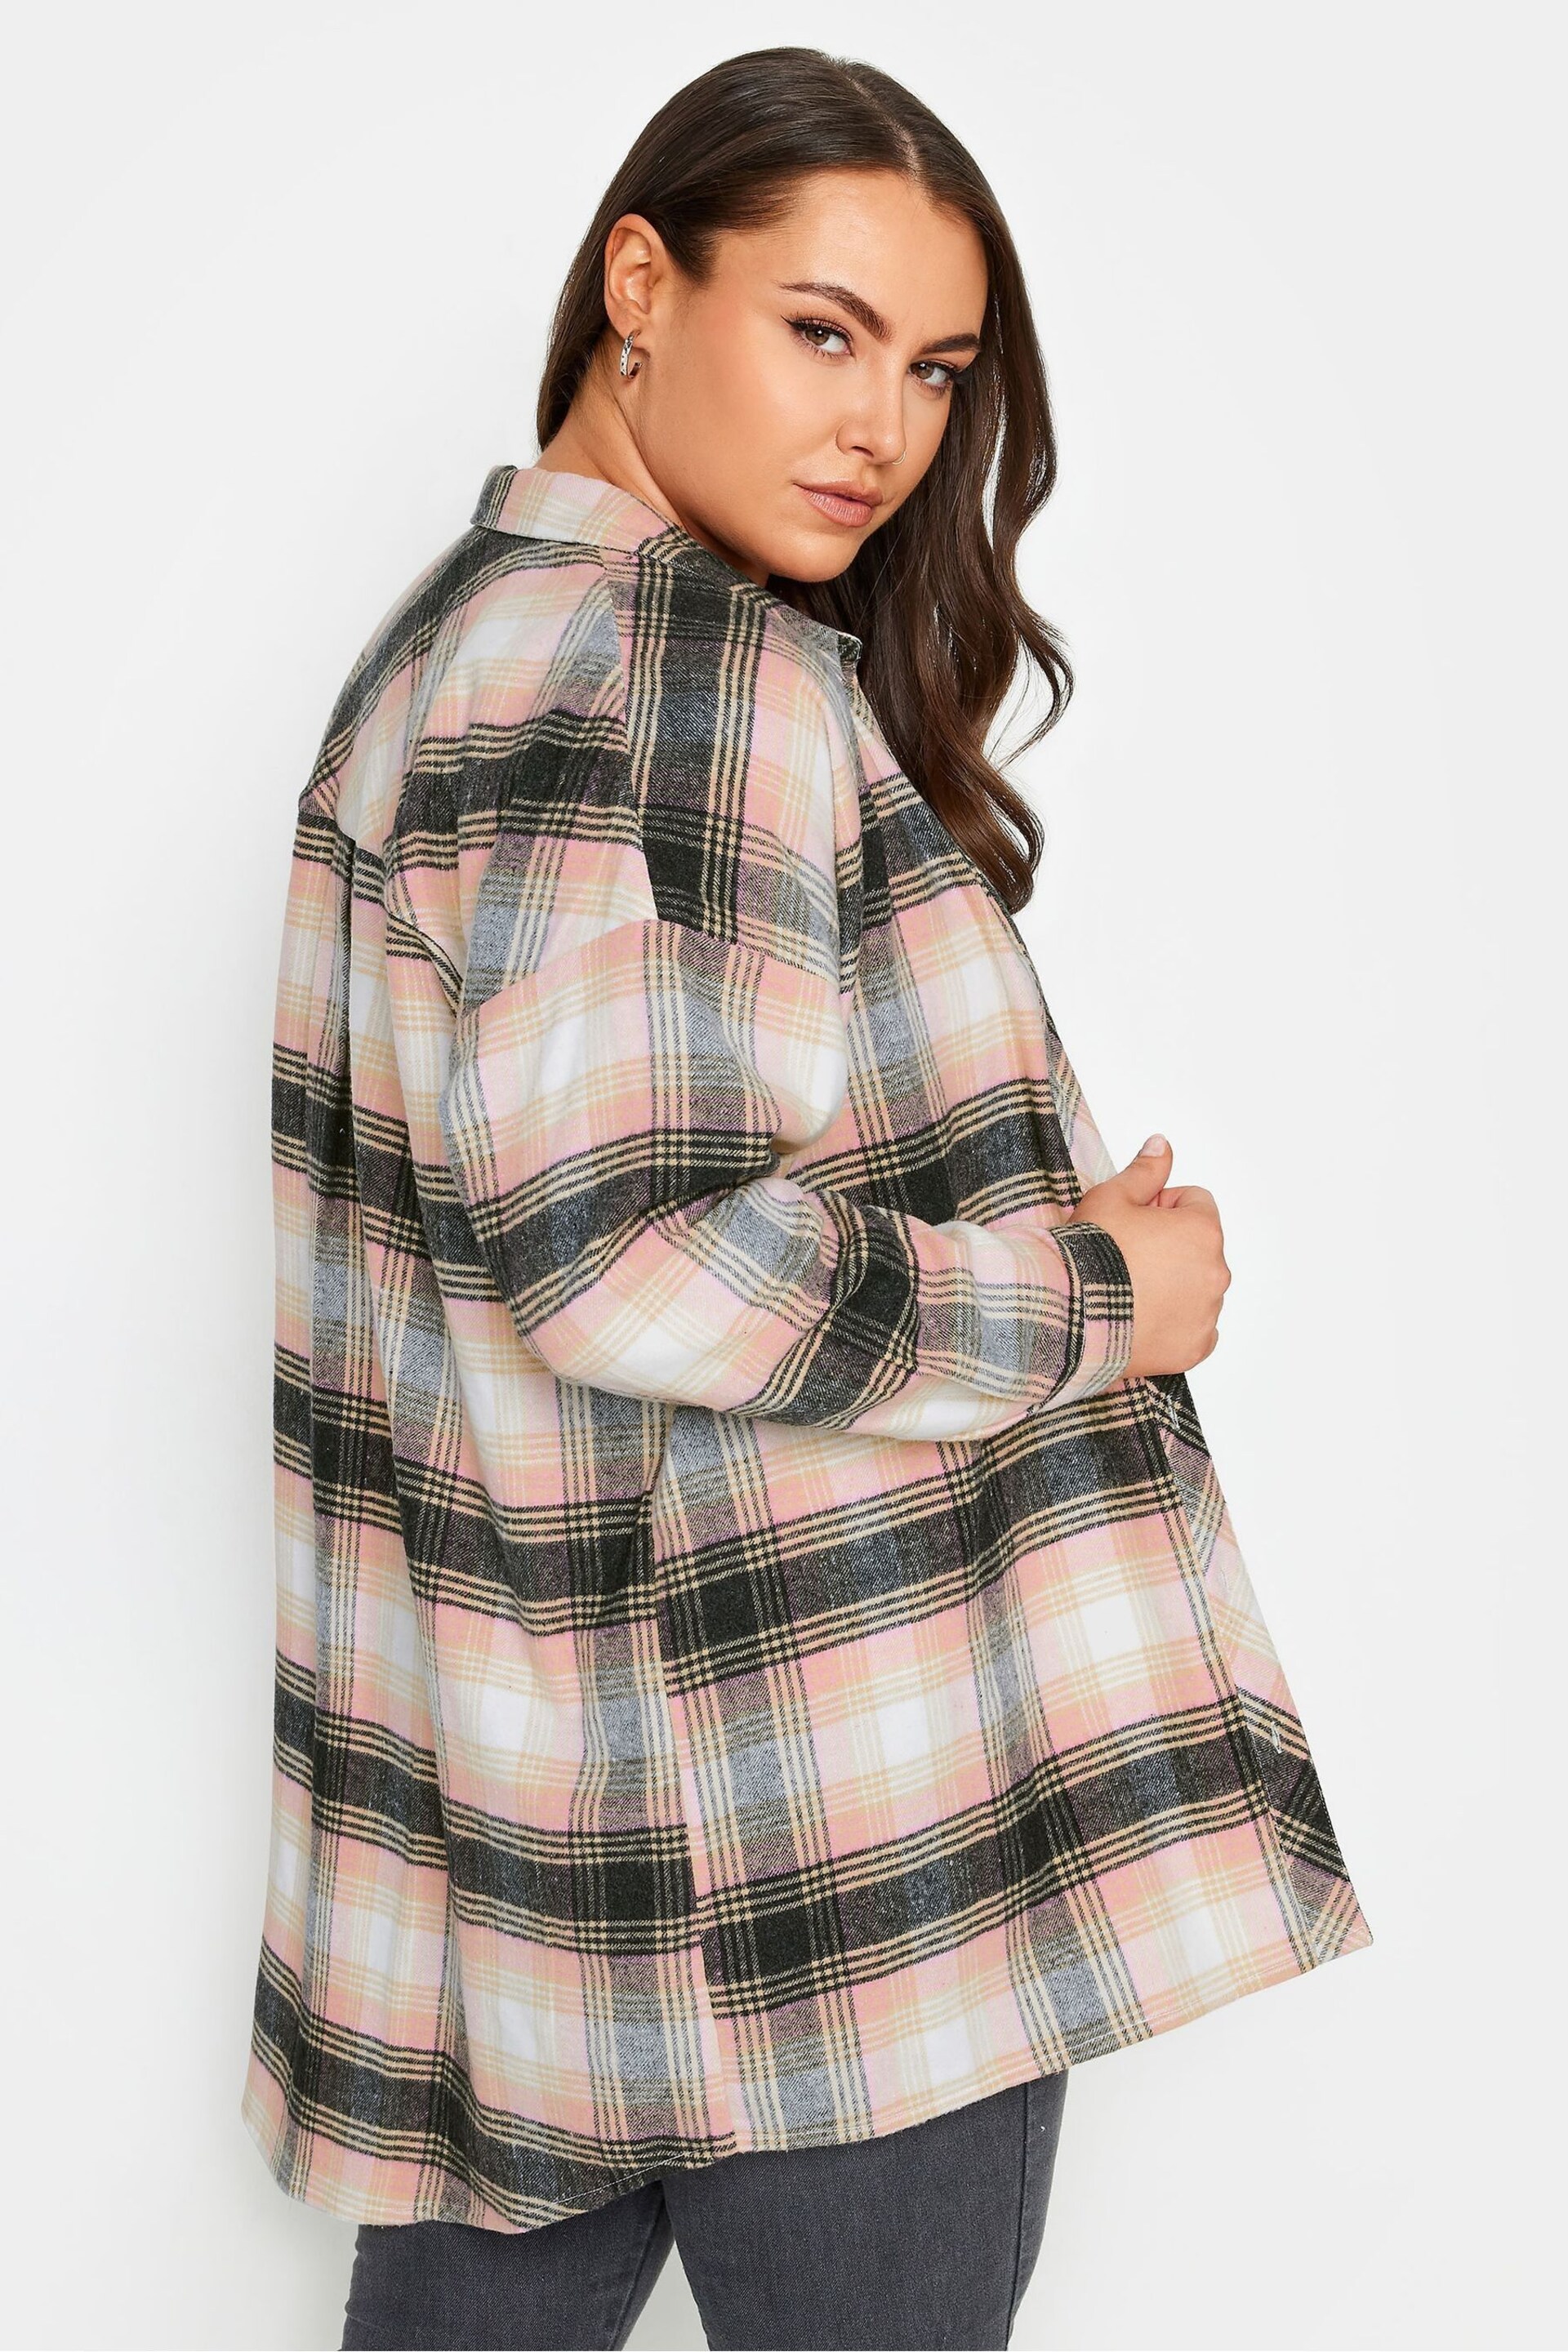 Yours Curve Pink Boyfriend Check Shirt - Image 1 of 4